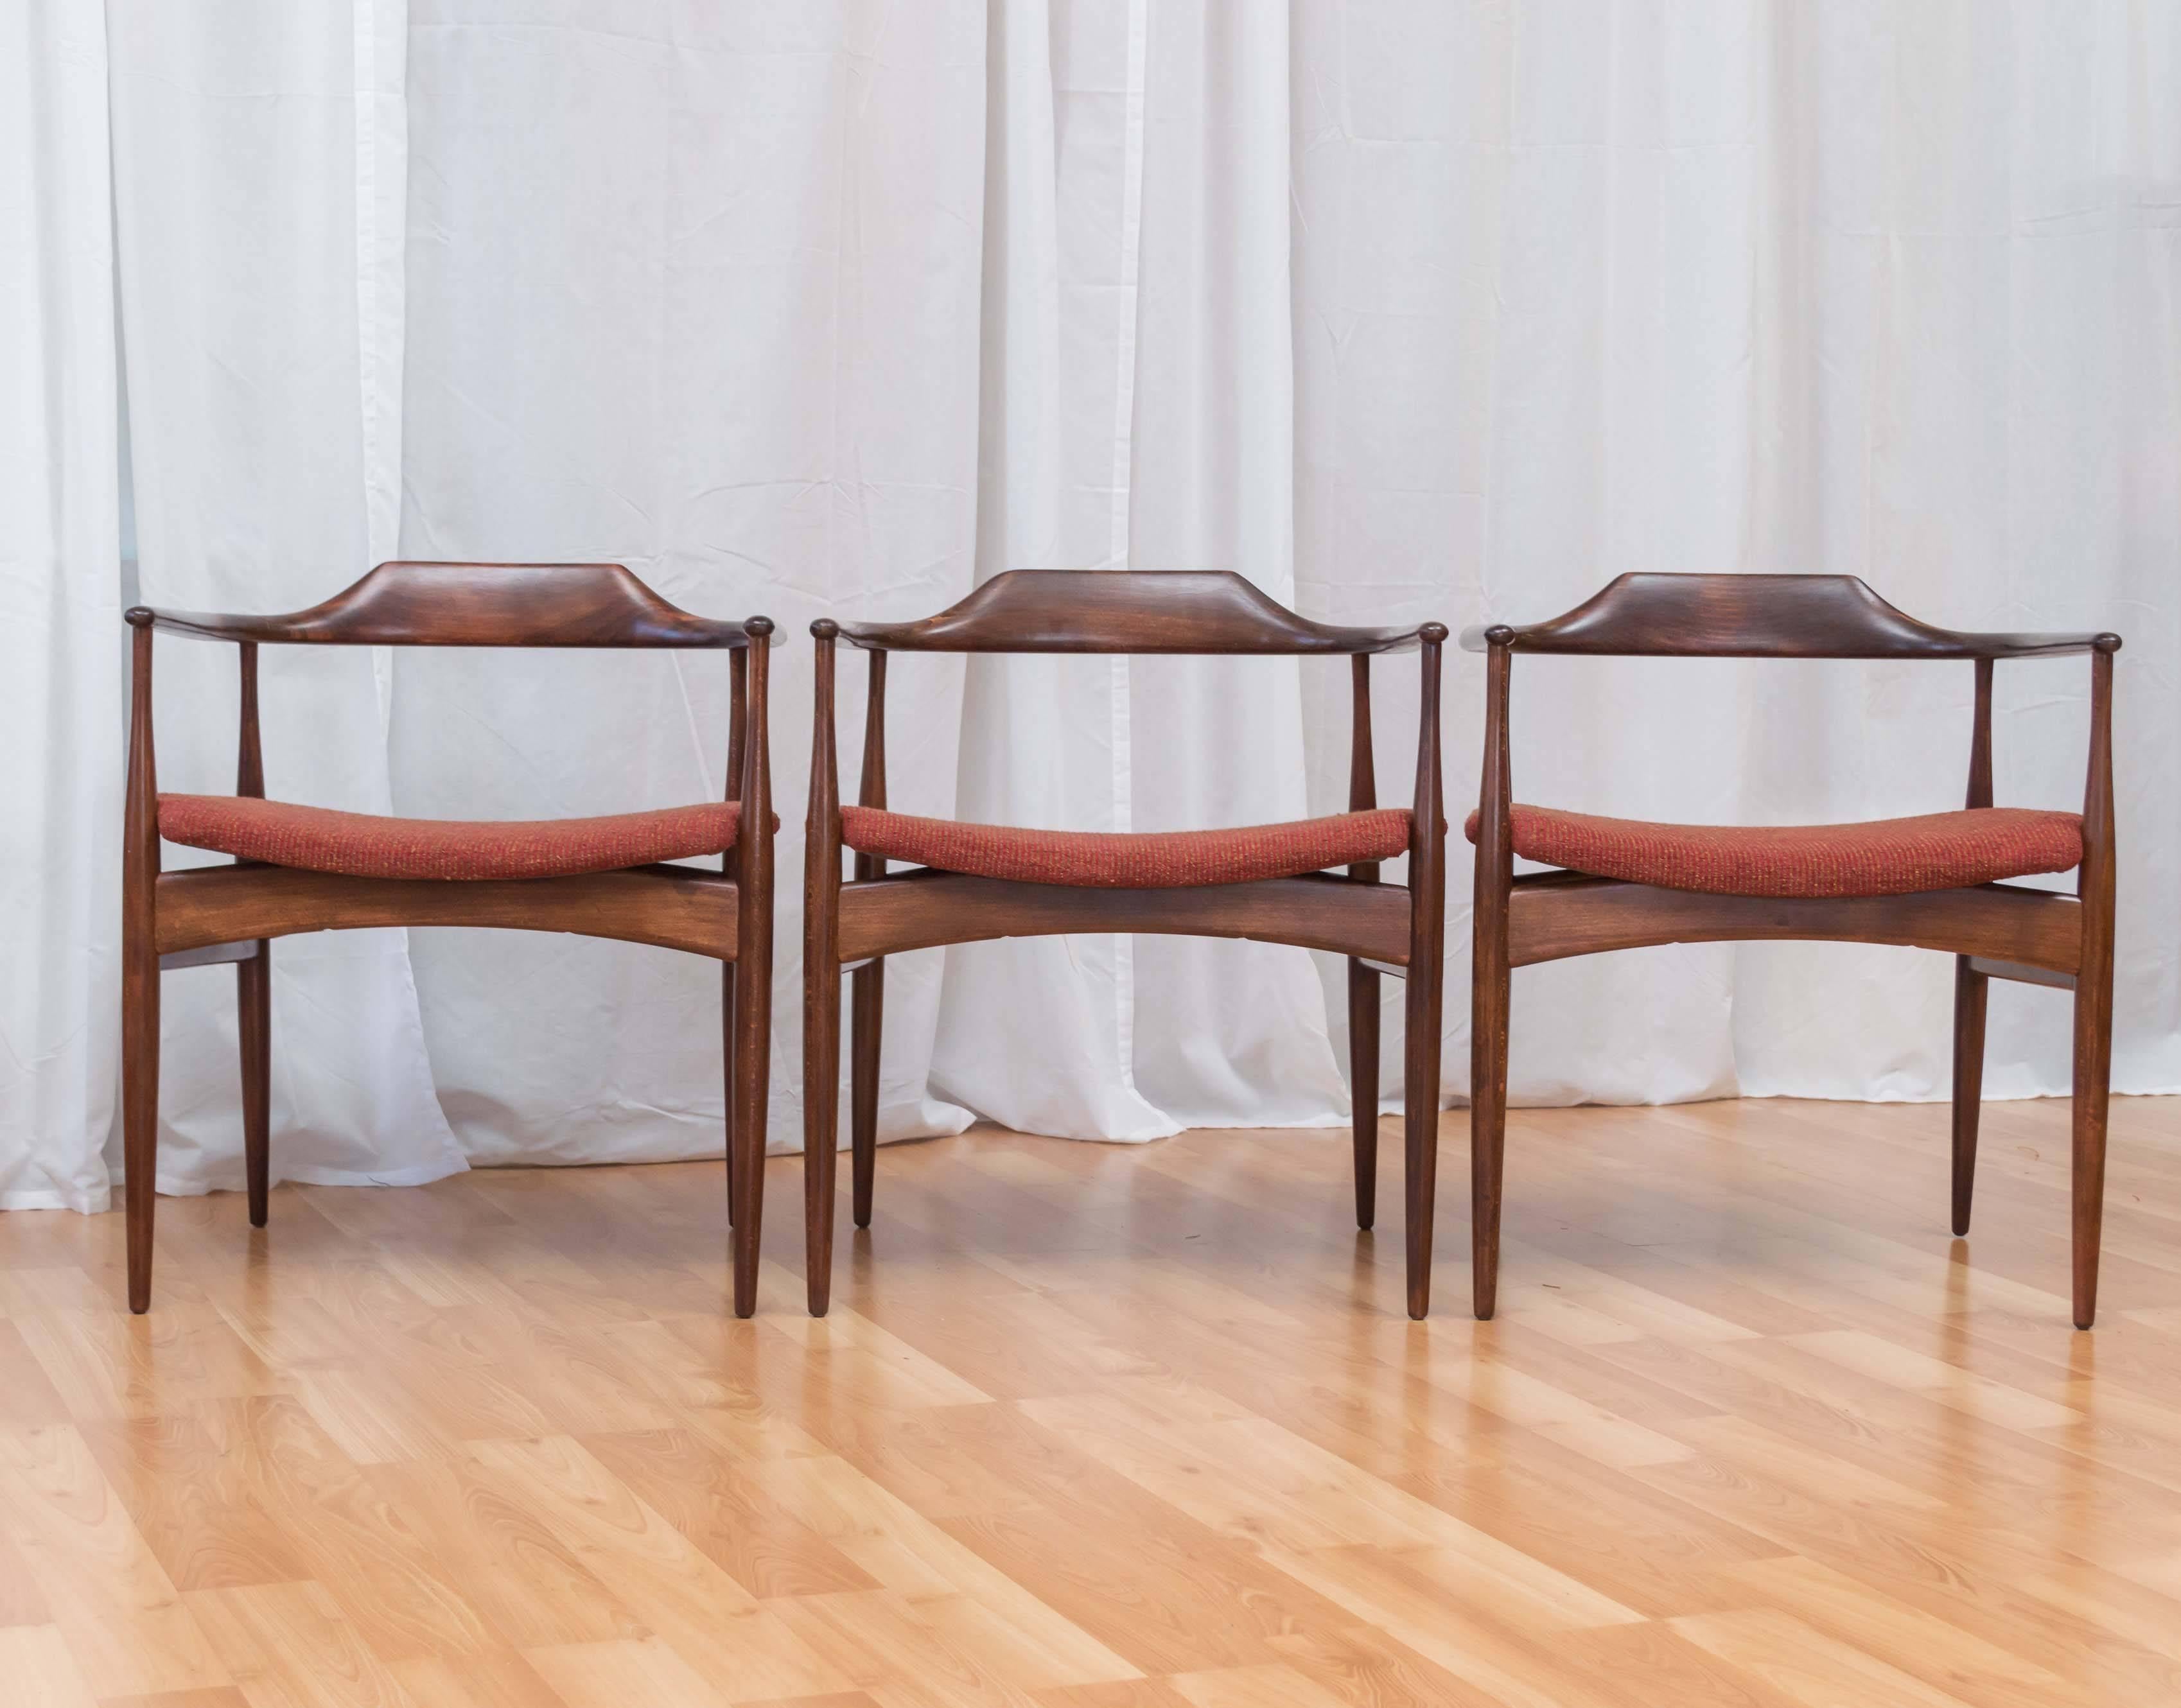 A six-piece set of generously-proportioned upholstered dining chairs with arms by Ib Kofod-Larsen for Selig.

Frames are expertly crafted out of solid beech, with a glossy raw-to-burnt umber finish that highlights their lively grain and sweeping